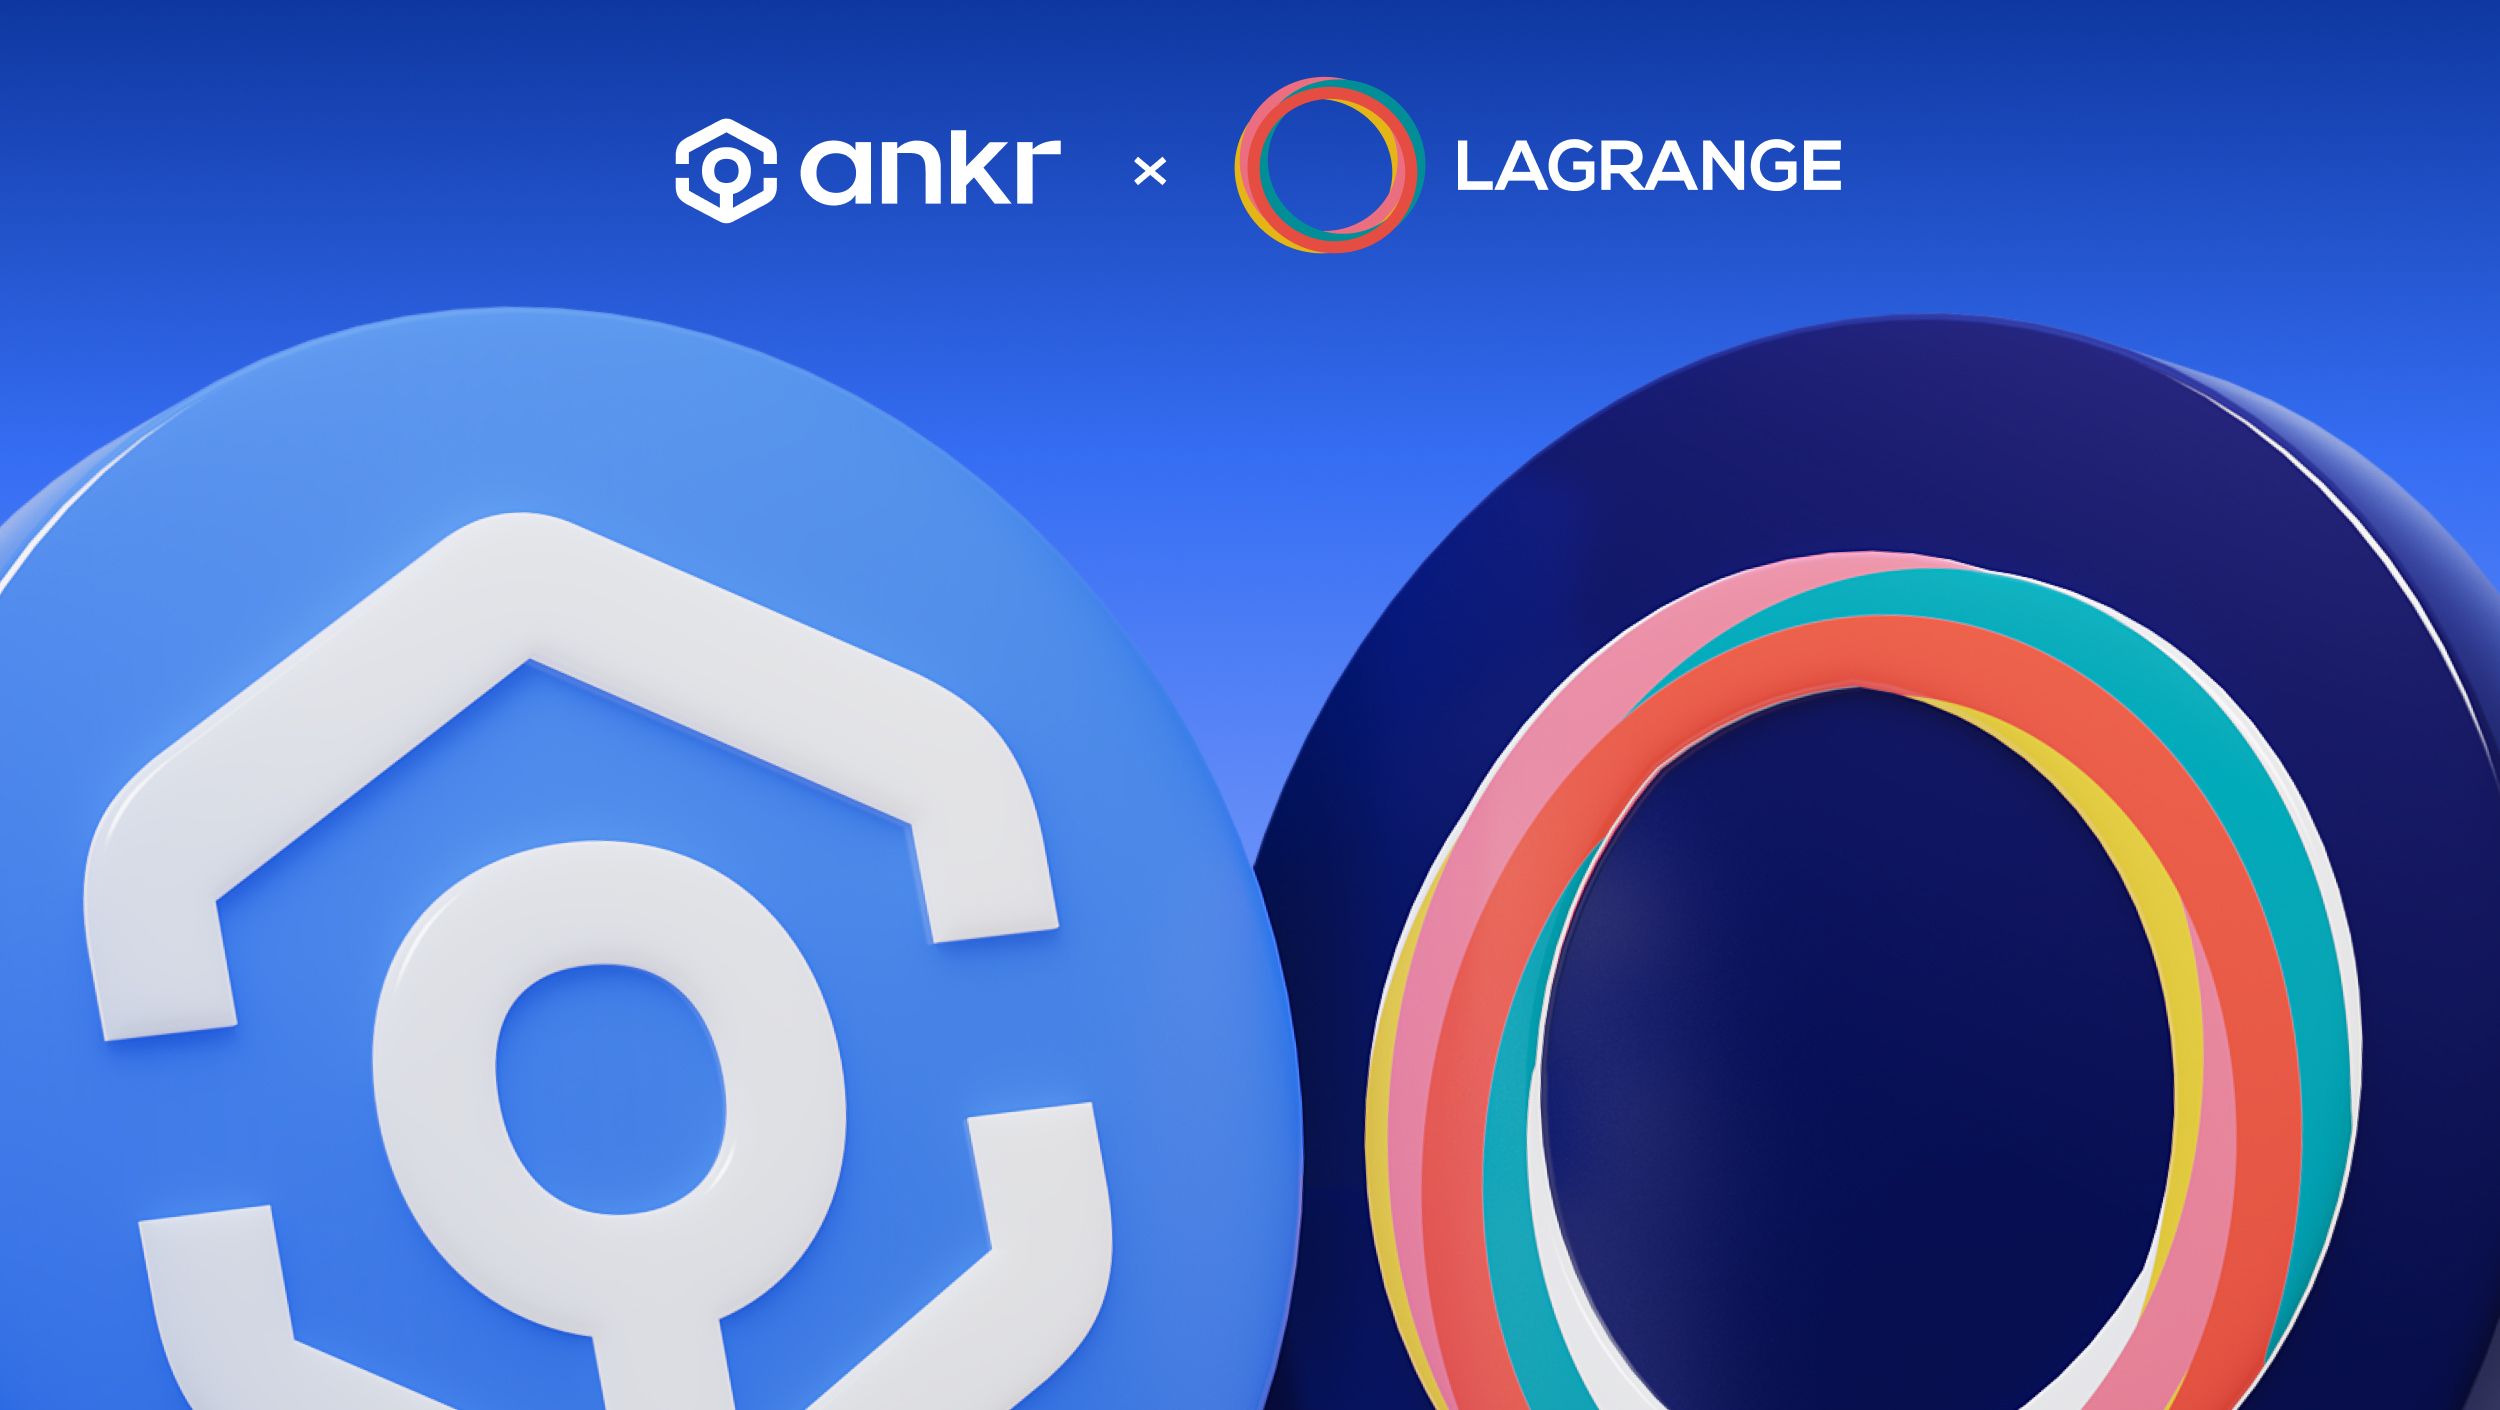 Ankr Teaming Up With Lagrange To Bring Hyper-Parallel ZK Coprocessing To Web3